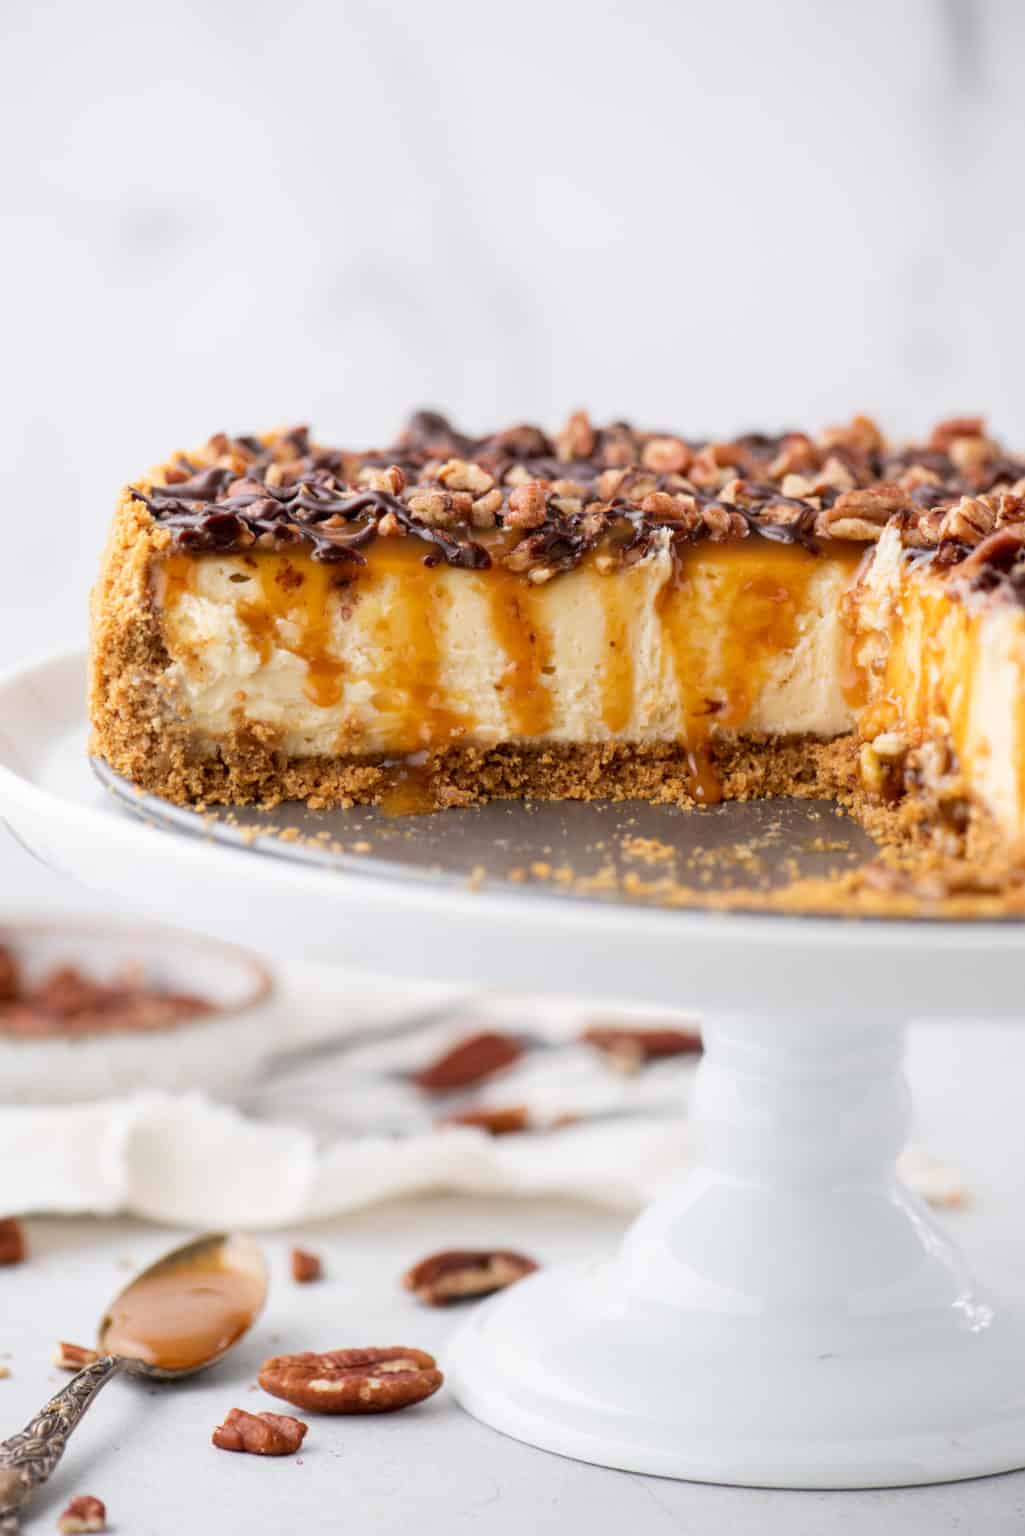 The Best Turtle Cheesecake Recipe - The First Year